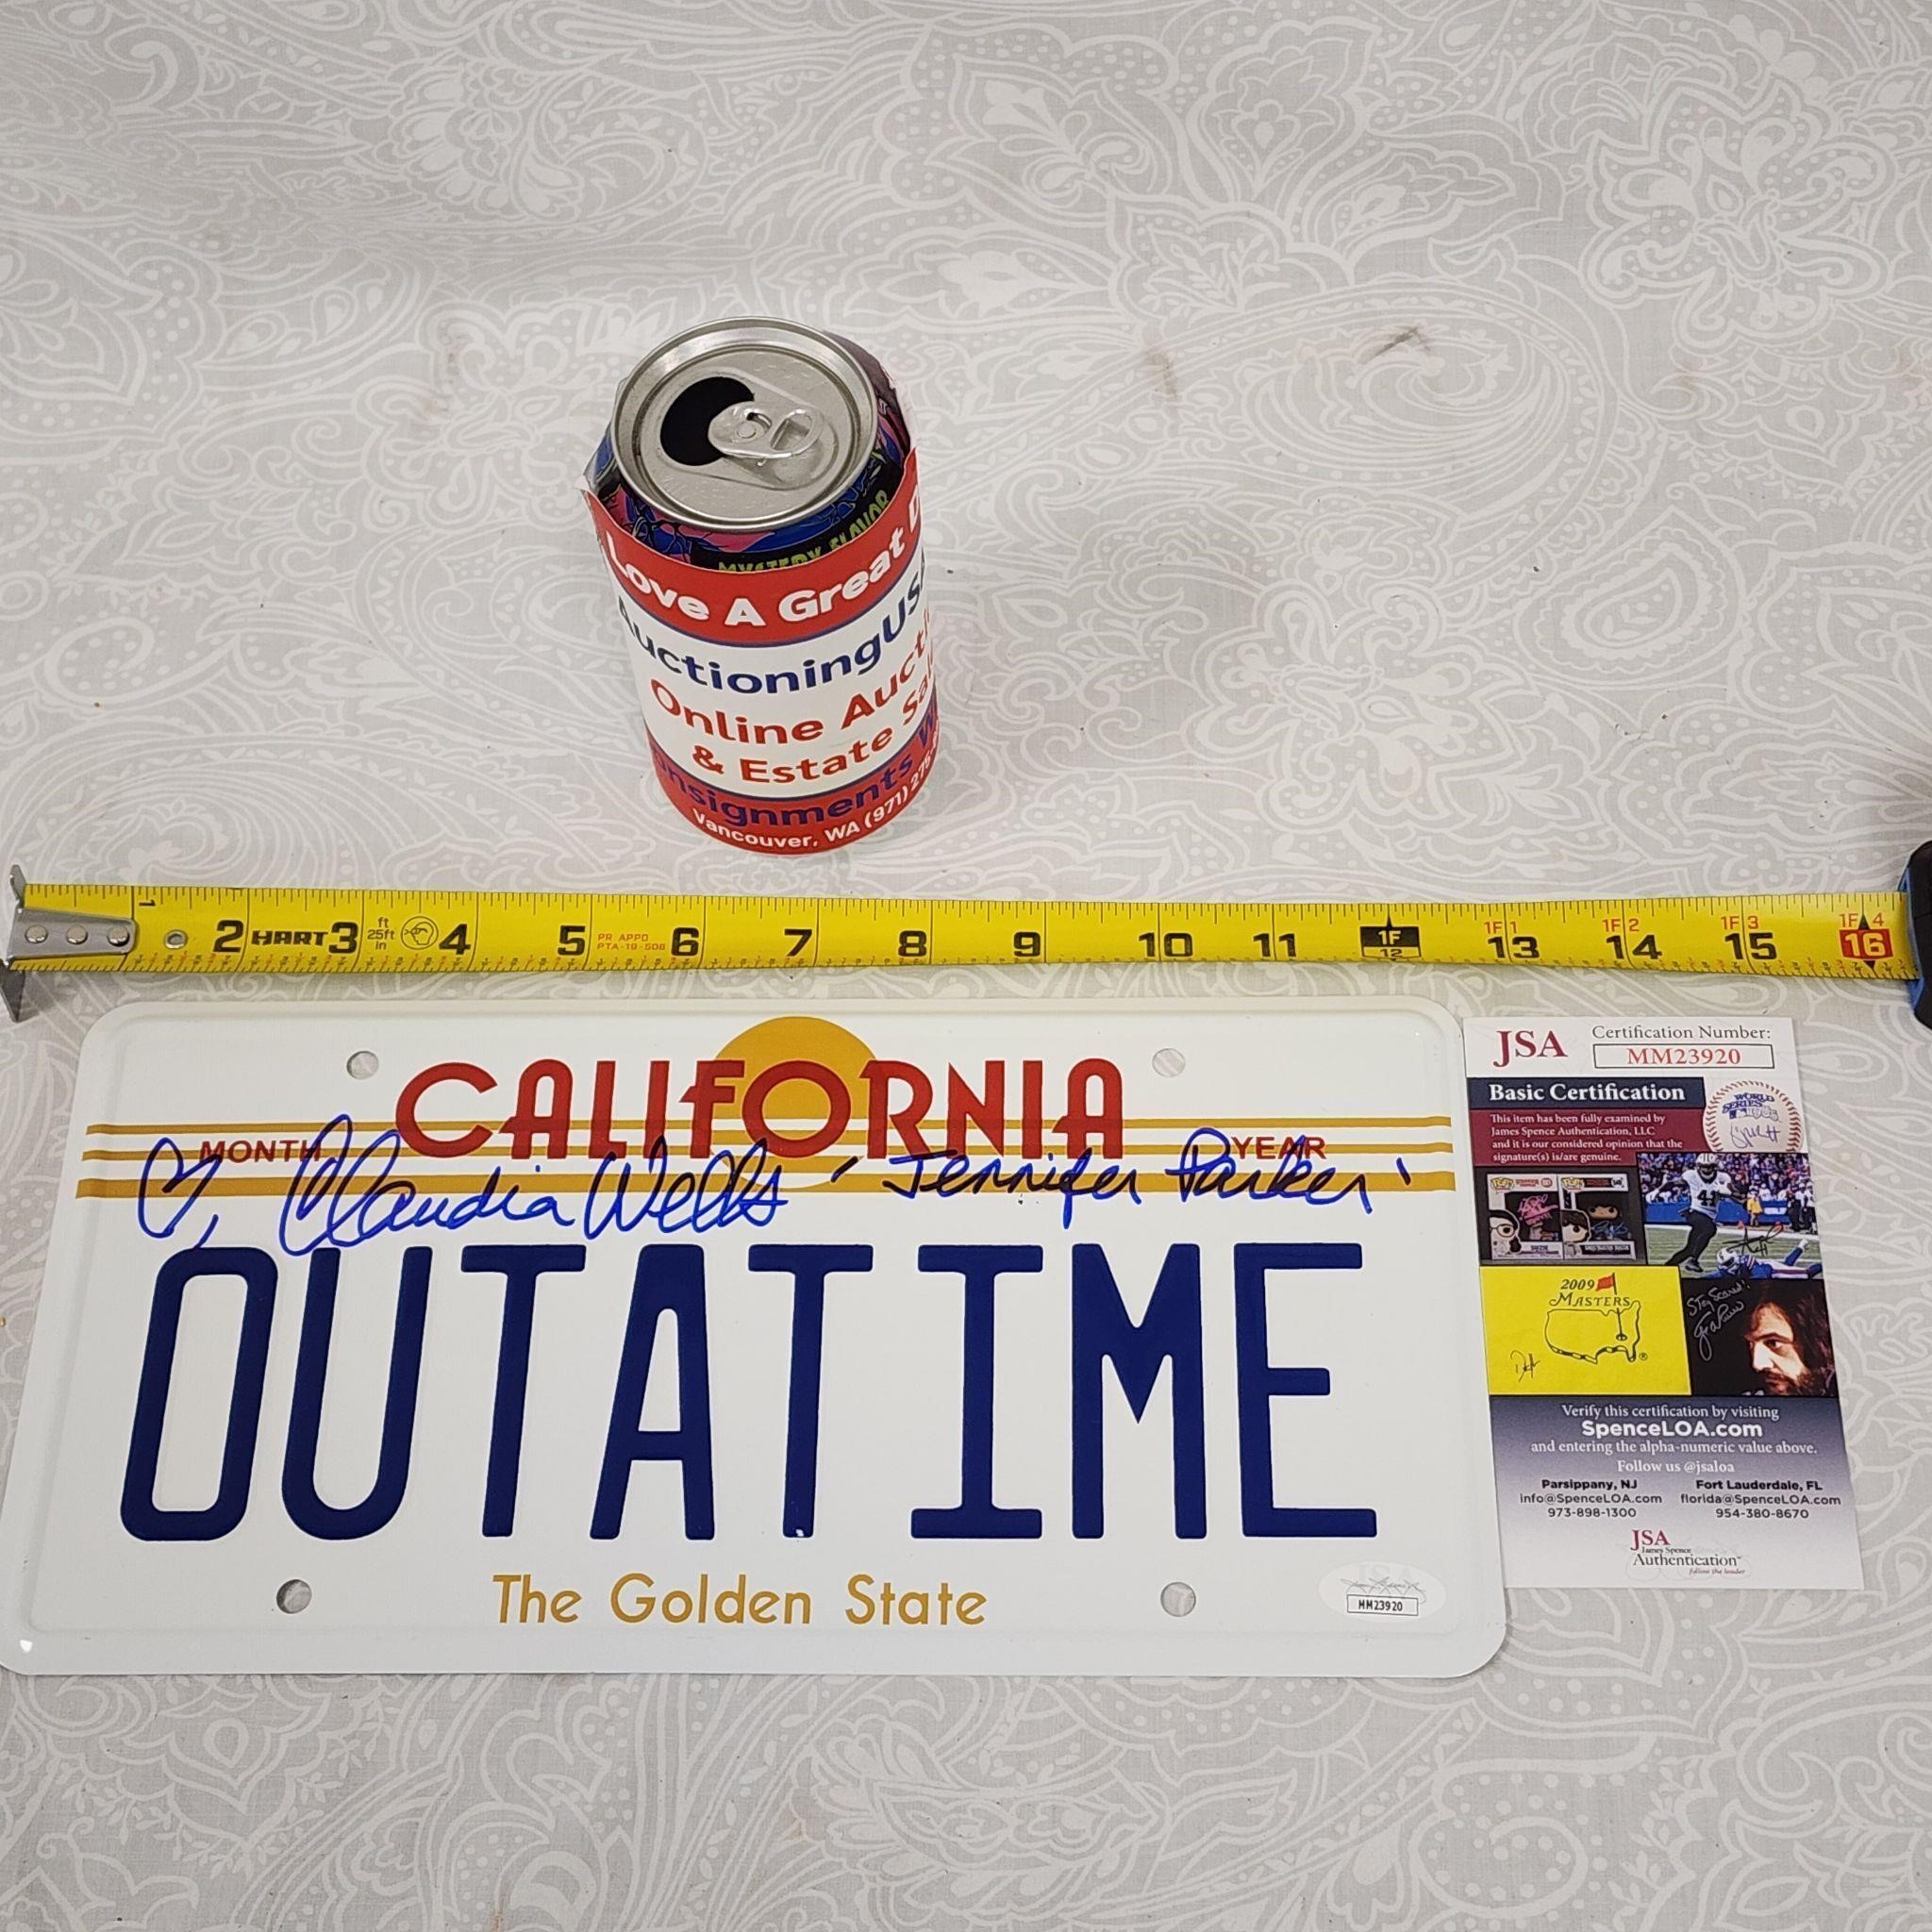 Back To The Future Signed OUTATIME License Plate